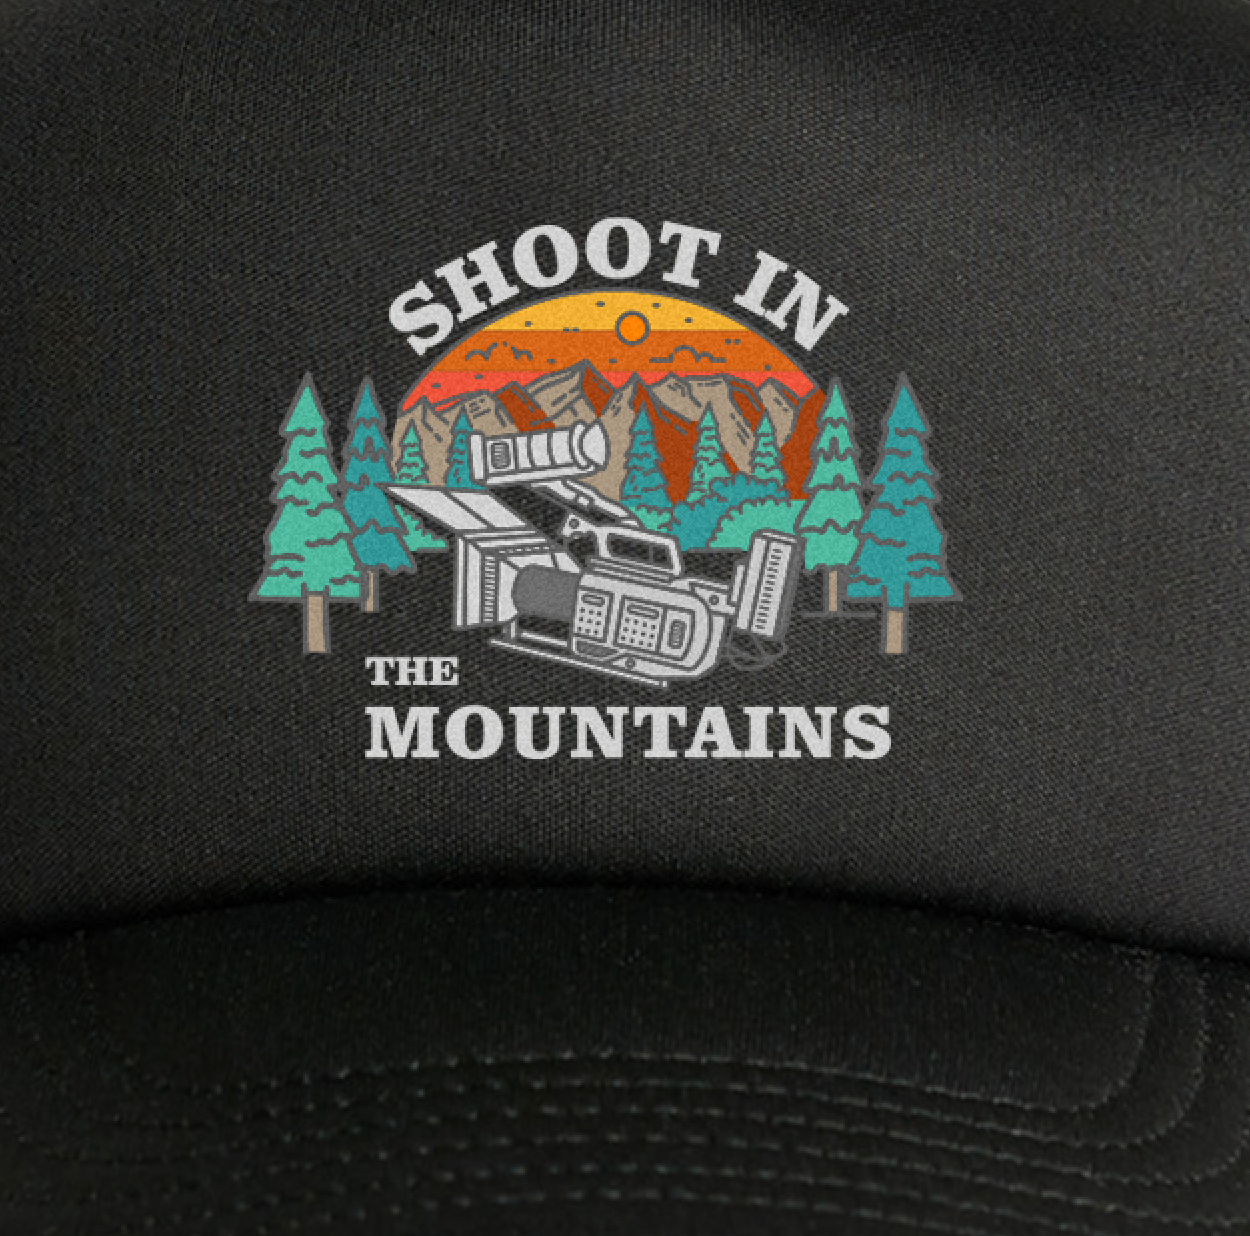 Shoot In The Mountains Hat - Black